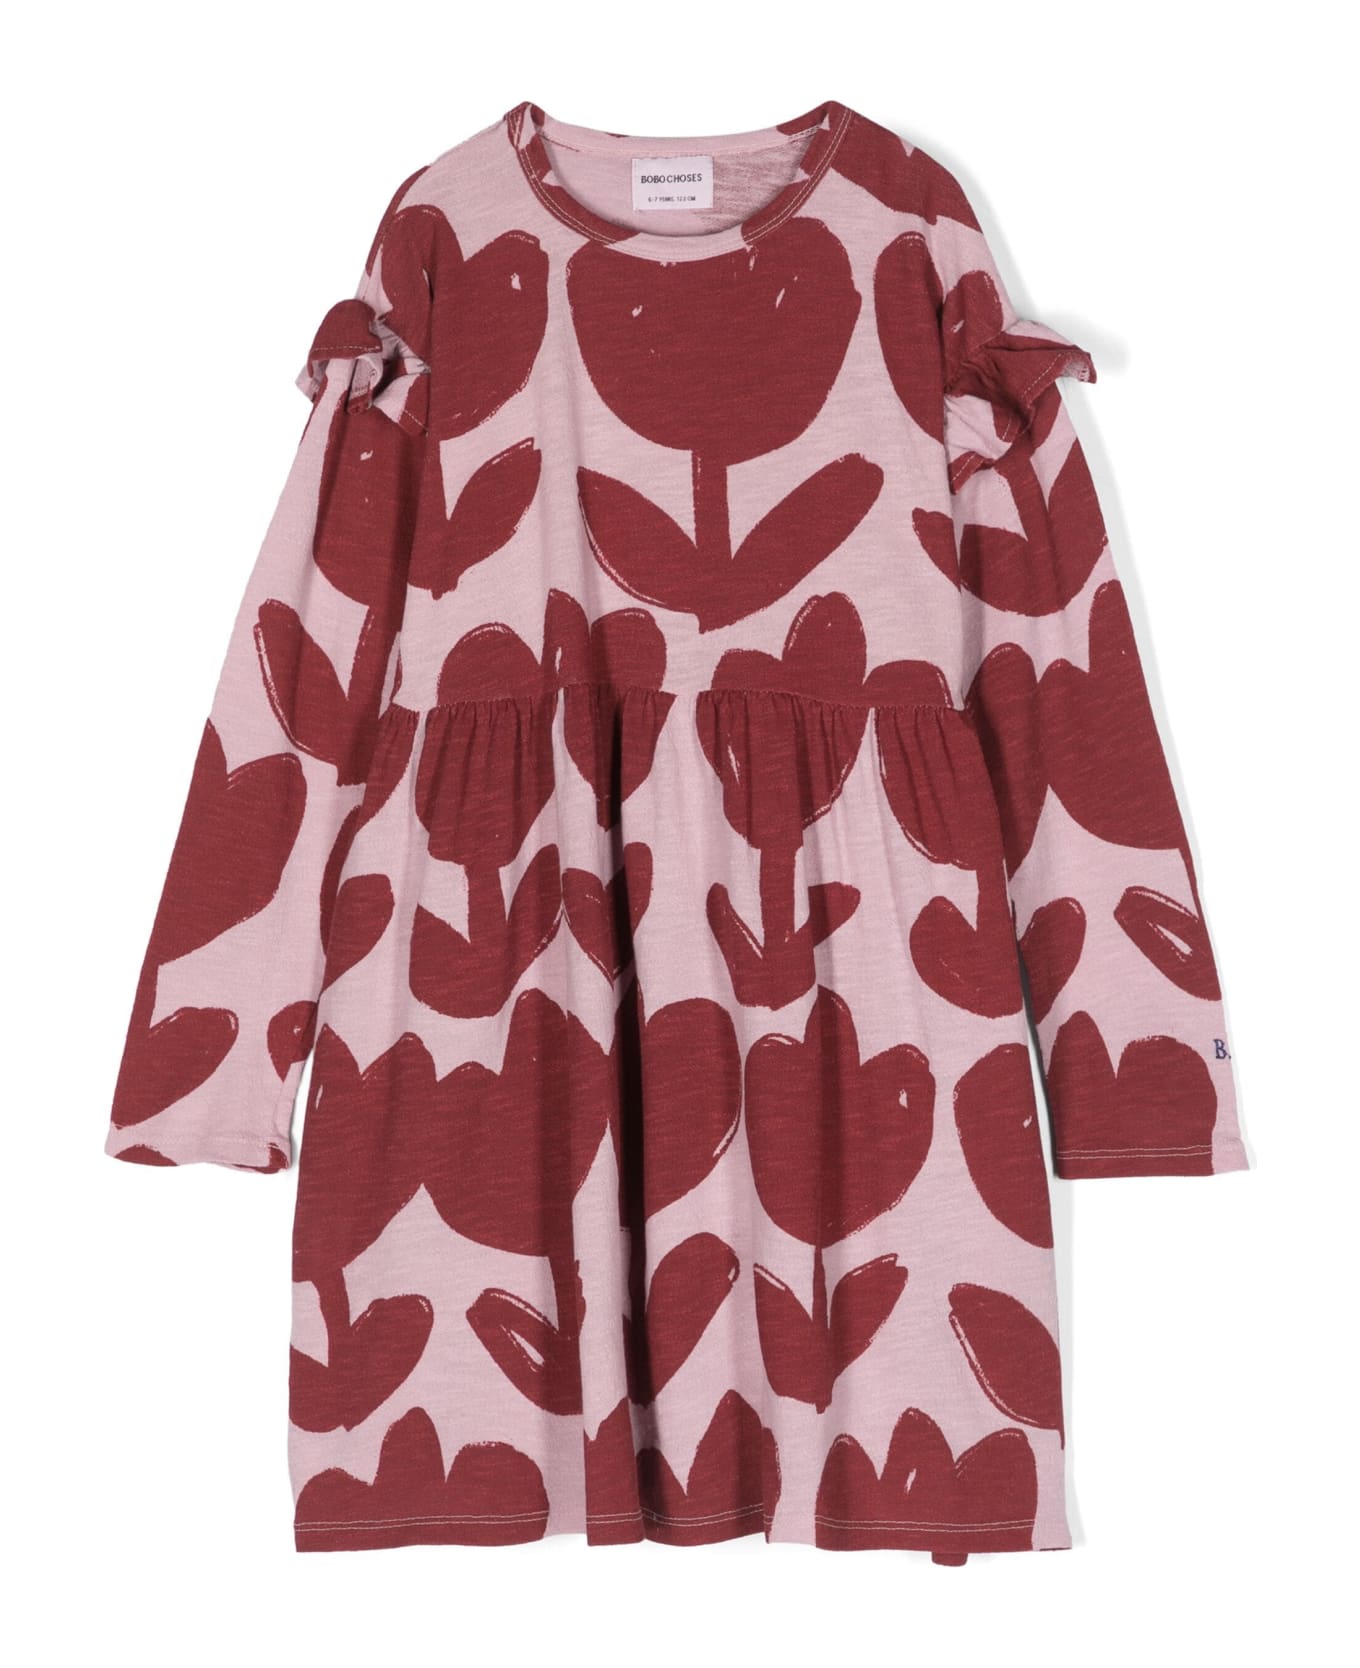 Bobo Choses Pink Dress For Girl With All-over Flowers - Multicolor ワンピース＆ドレス